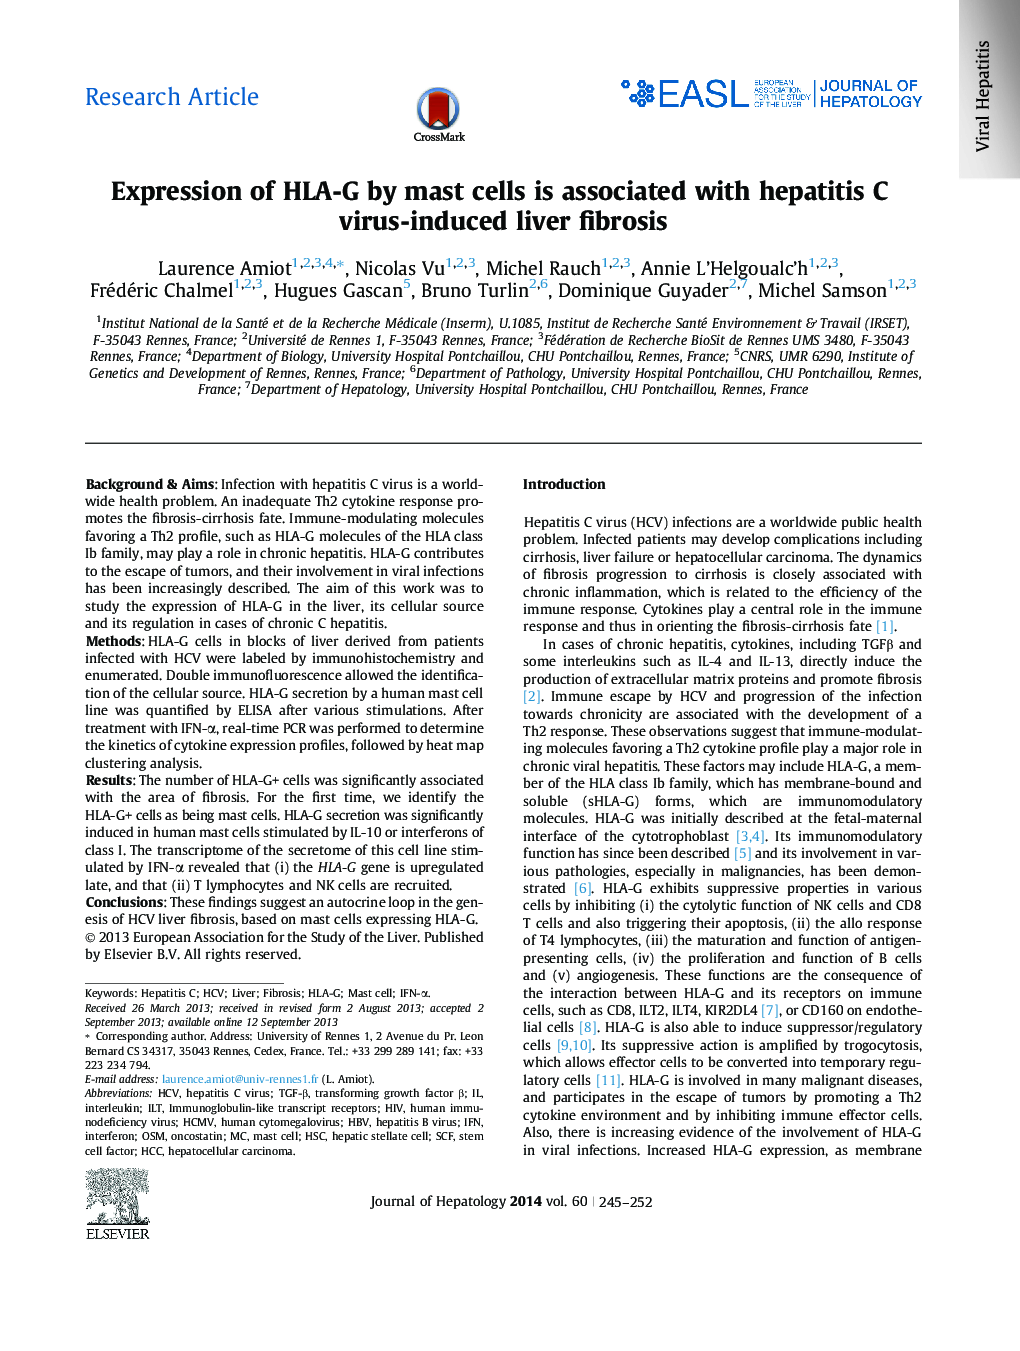 Research ArticleExpression of HLA-G by mast cells is associated with hepatitis C virus-induced liver fibrosis